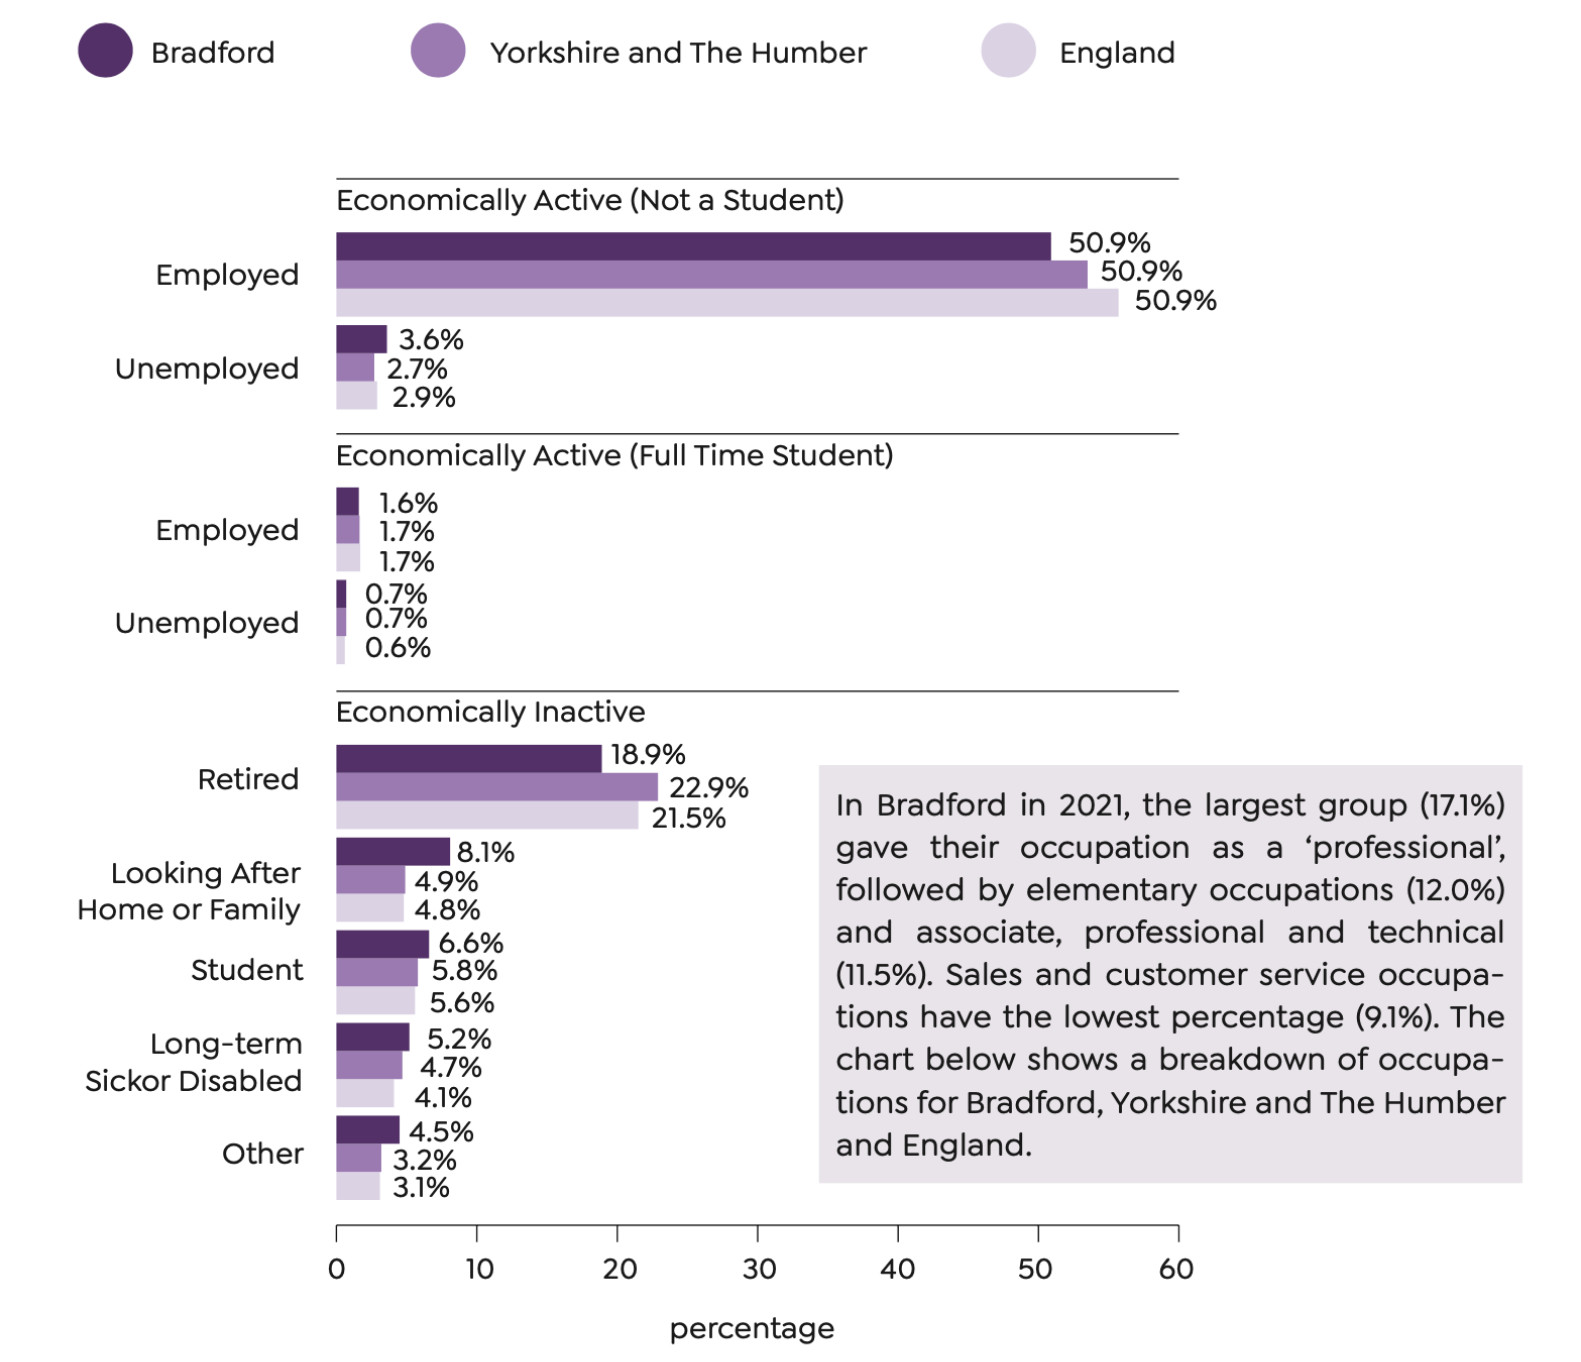 Bradford 2021 Economically Active (Not a Student) Employed: 50.9% Unemployed: 3.6% Economically Active (Full Time Student) Employed: 1.6% Unemployed: 0.7% Economically Inactive Retired: 18.9% Looking After Home or Family: 8.1% Student: 6.6% Long-term Sick or Disabled: 5.2% Other: 4.5% Yorkshire and The Humber 2021 Economically Active (Not a Student) Employed: 50.9% Unemployed: 2.7% Economically Active (Full Time Student) Employed: 1.7% Unemployed: 0.7% Economically Inactive Retired: 22.9% Looking After Home or Family: 4.9% Student: 5.8% Long-term Sick or Disabled: 4.7% Other: 3.2% England 2021 Economically Active (Not a Student) Employed: 50.9% Unemployed: 2.9% Economically Active (Full Time Student) Employed: 1.7% Unemployed: 0.6% Economically Inactive Retired: 21.5% Looking After Home or Family: 4.8% Student: 5.6% Long-term Sick or Disabled: 4.1% Other: 3.1%